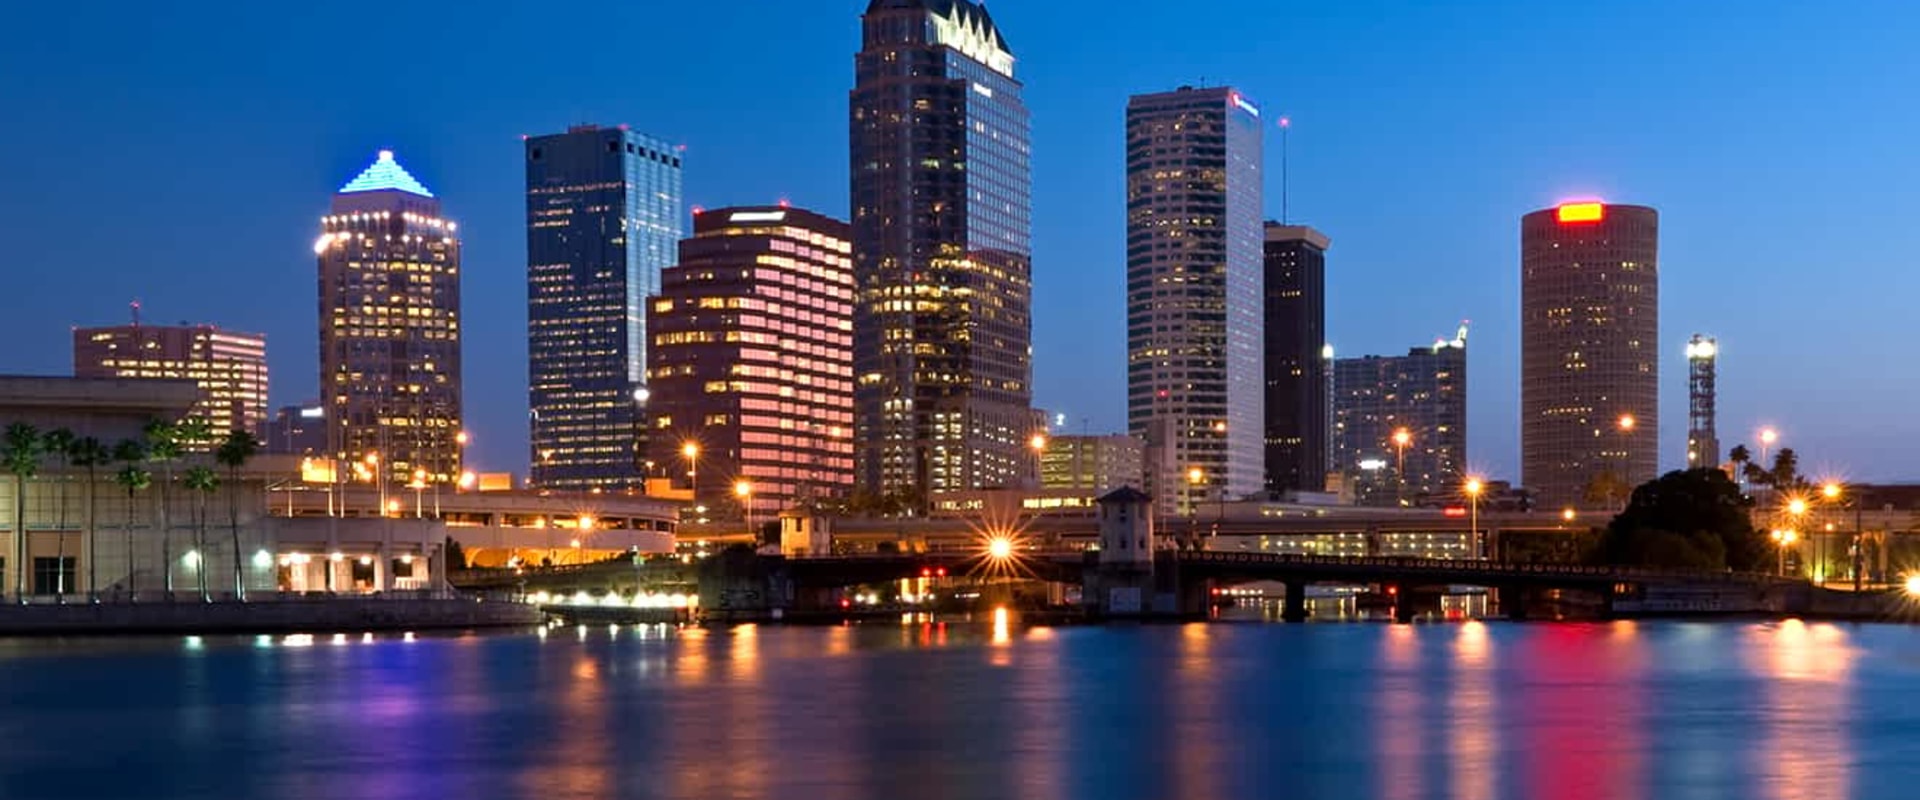 The Best Hotels in Downtown Tampa, Florida - A Guide for Explorers